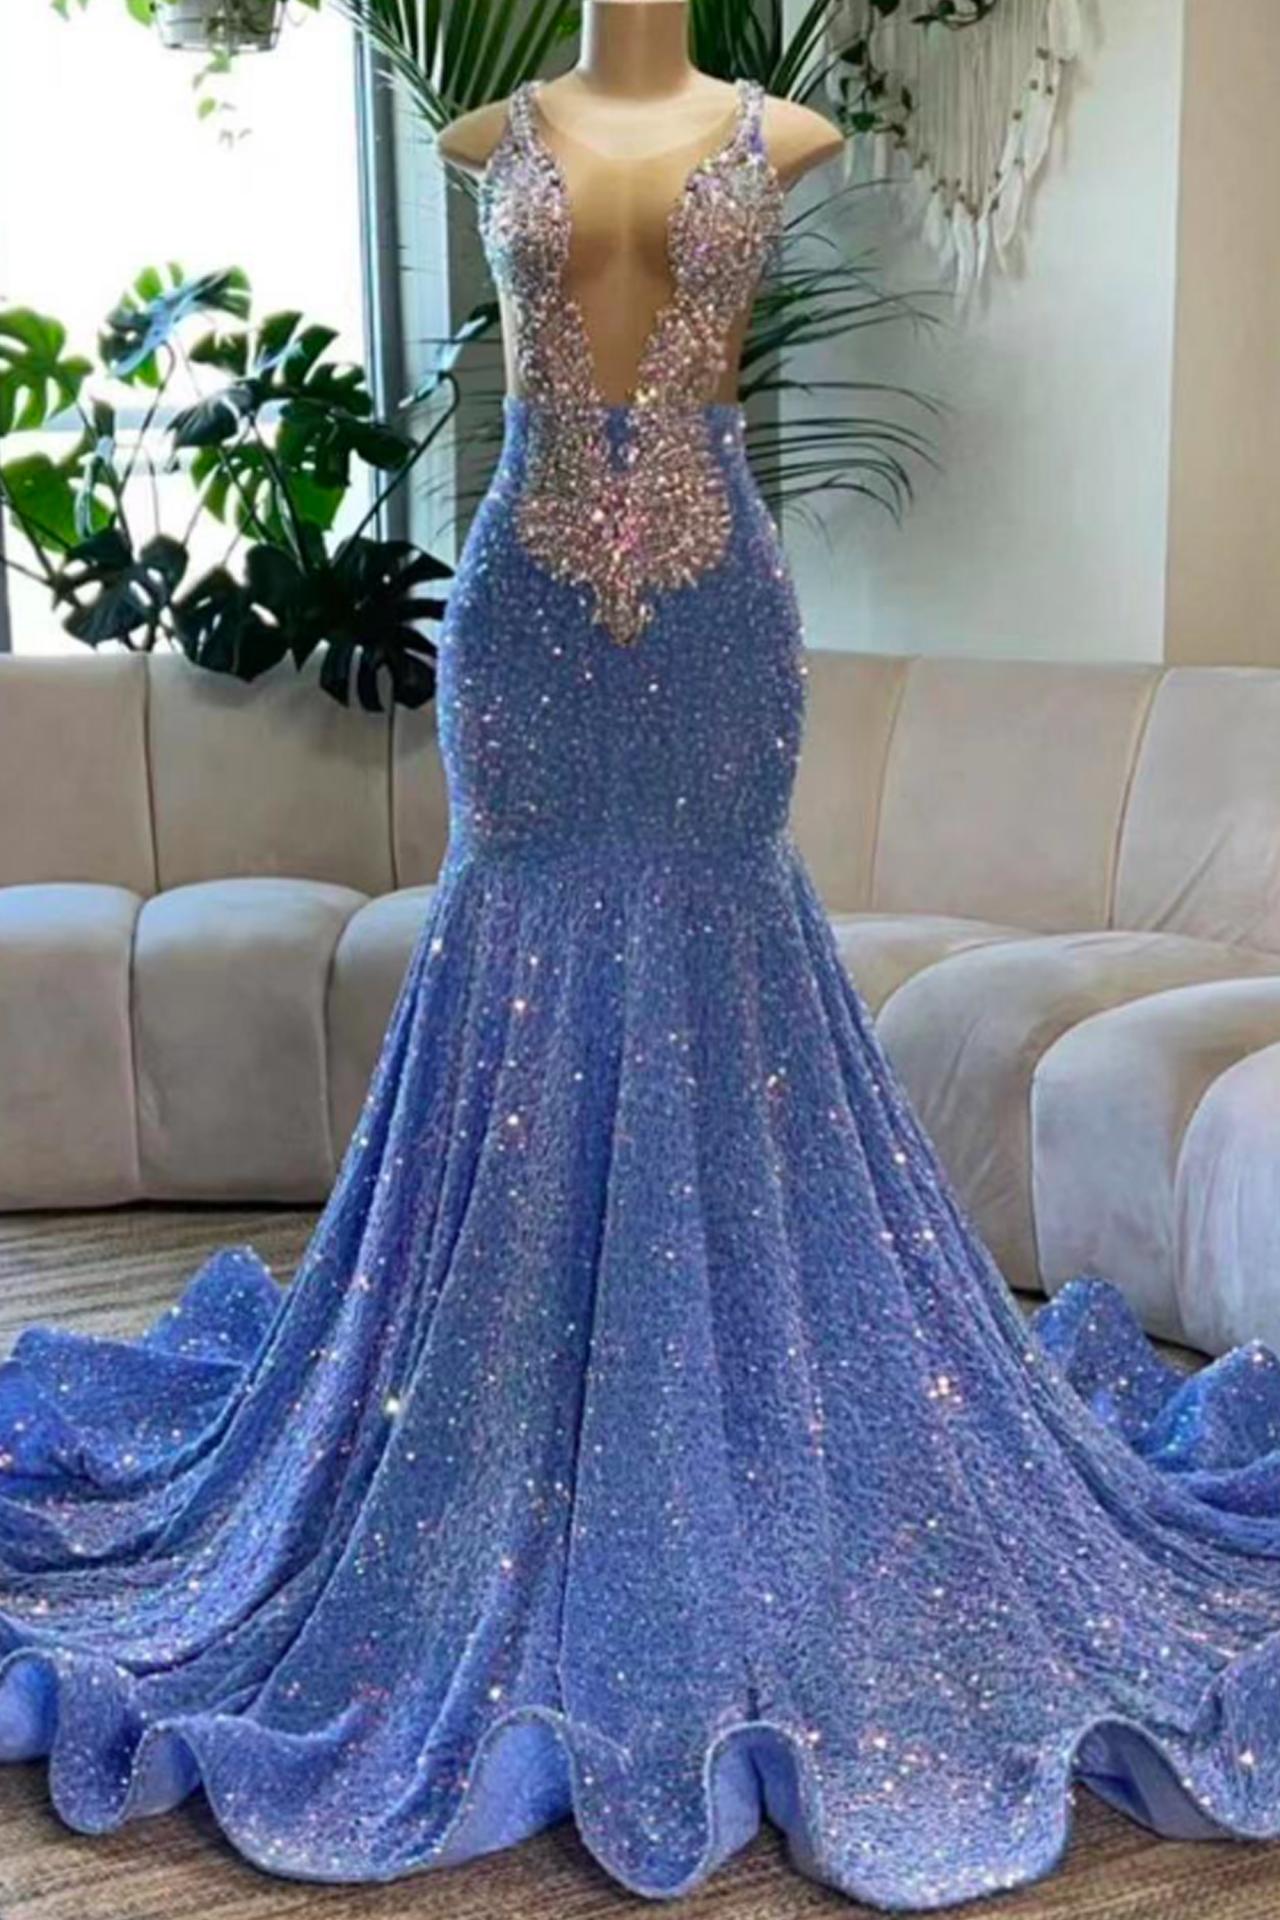 Blue Prom Dresses, Sparkly Sequin Prom Dress, Crystals Prom Dresses ...